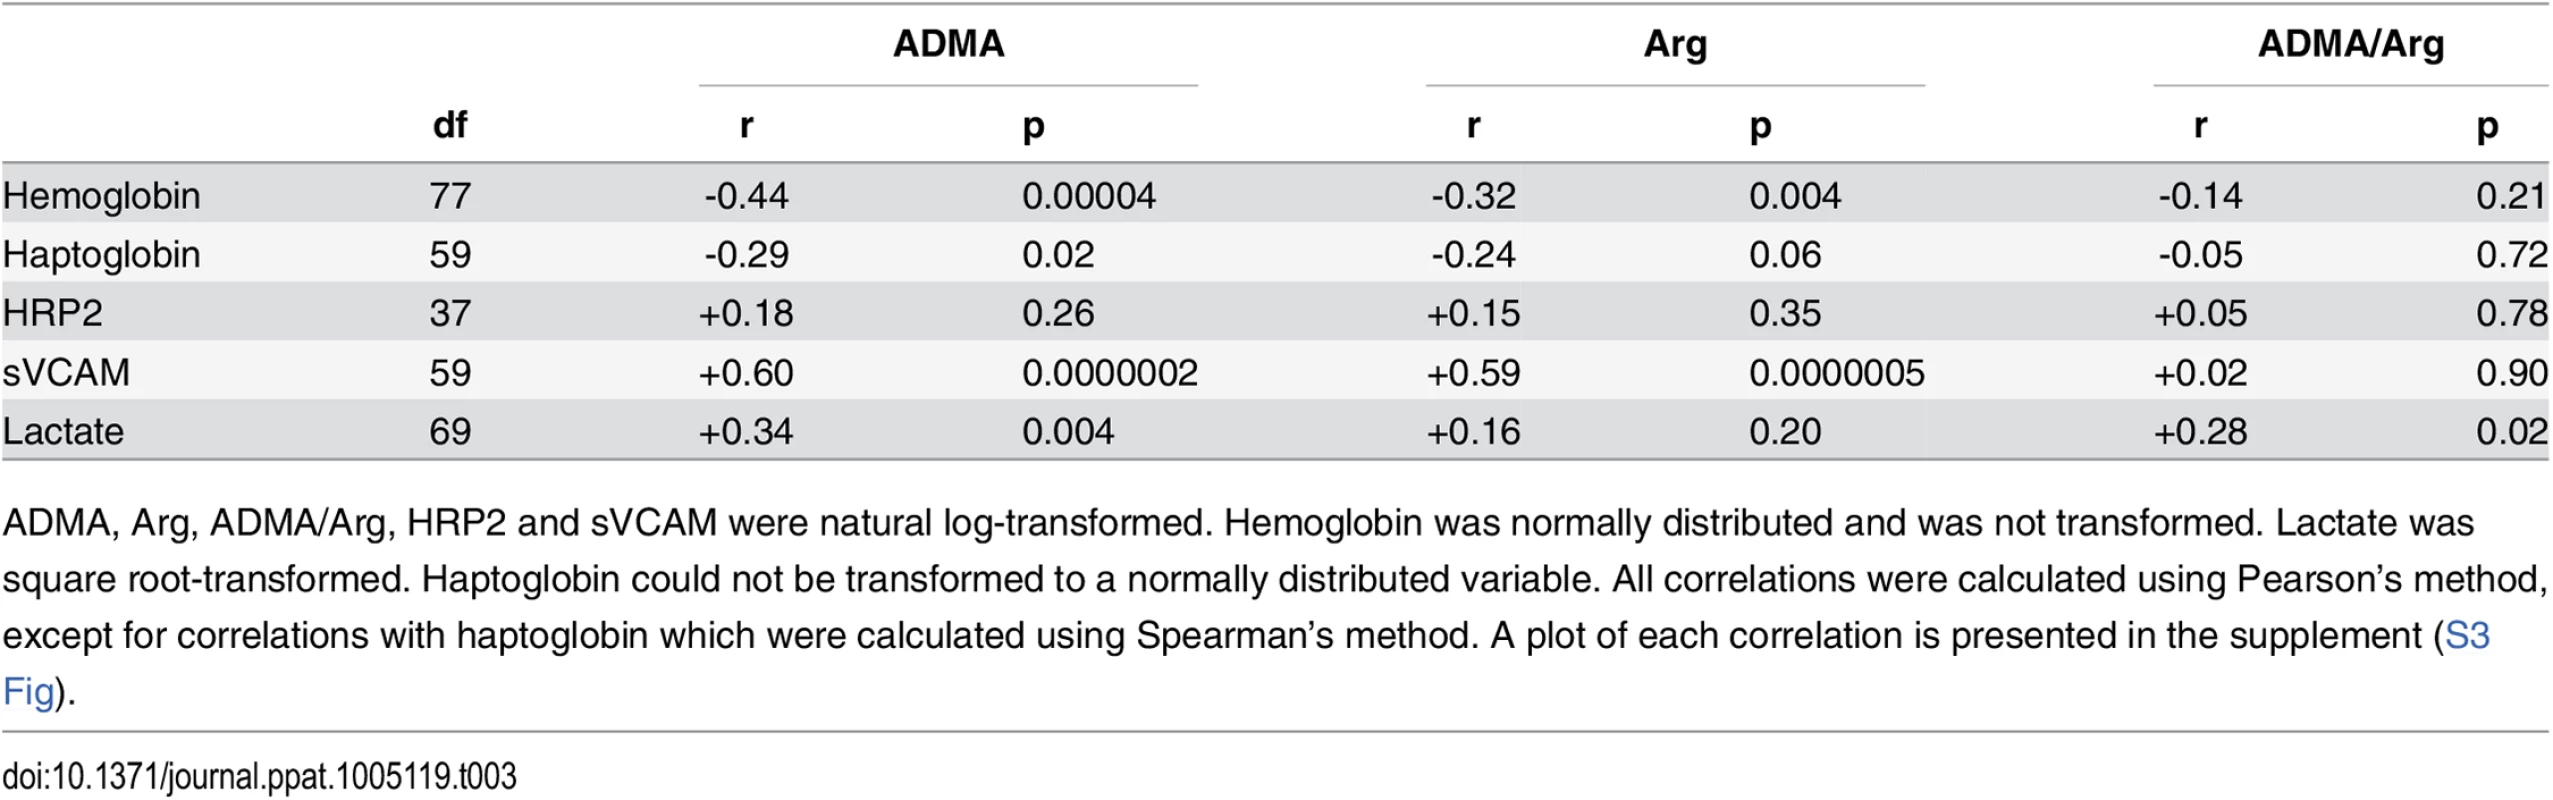 Correlation of ADMA with biomarkers of anemia, hemolysis, parasite biomass, endothelial activity, and tissue perfusion among children with severe malaria.